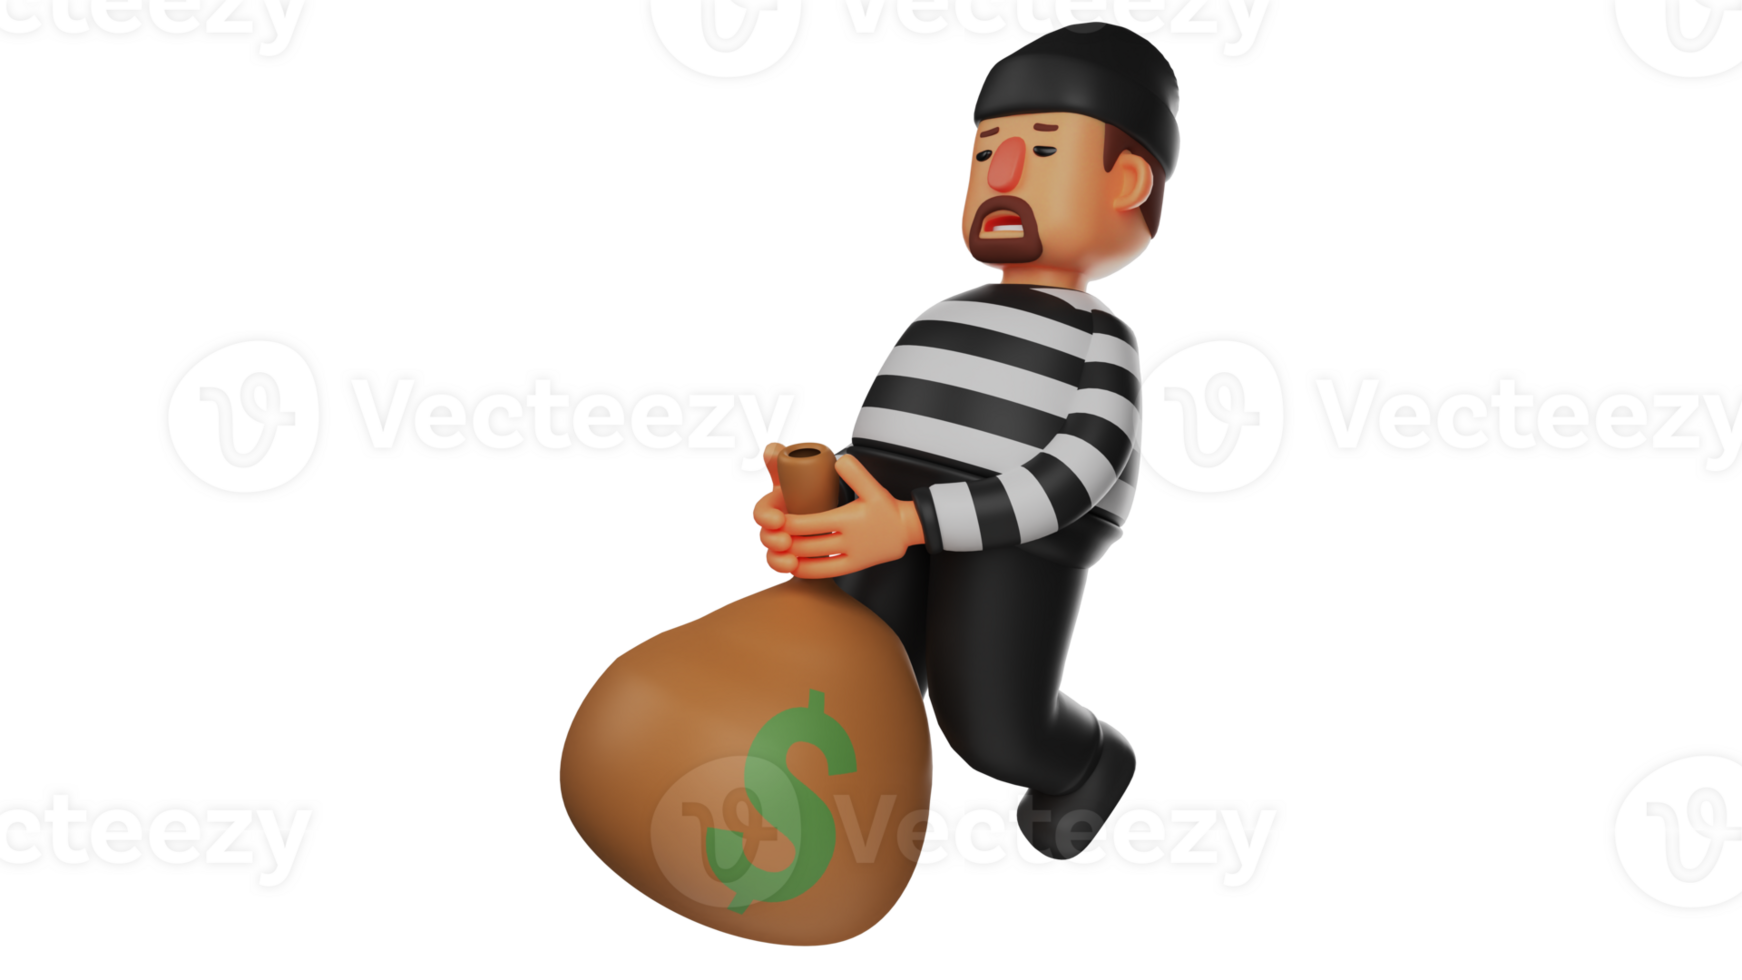 3D illustration. Tired Villain 3D Cartoon Character. Criminal is carrying out his actions to steal people's money. Thief walked while dragging a sack of money that he had stolen. 3D cartoon character png